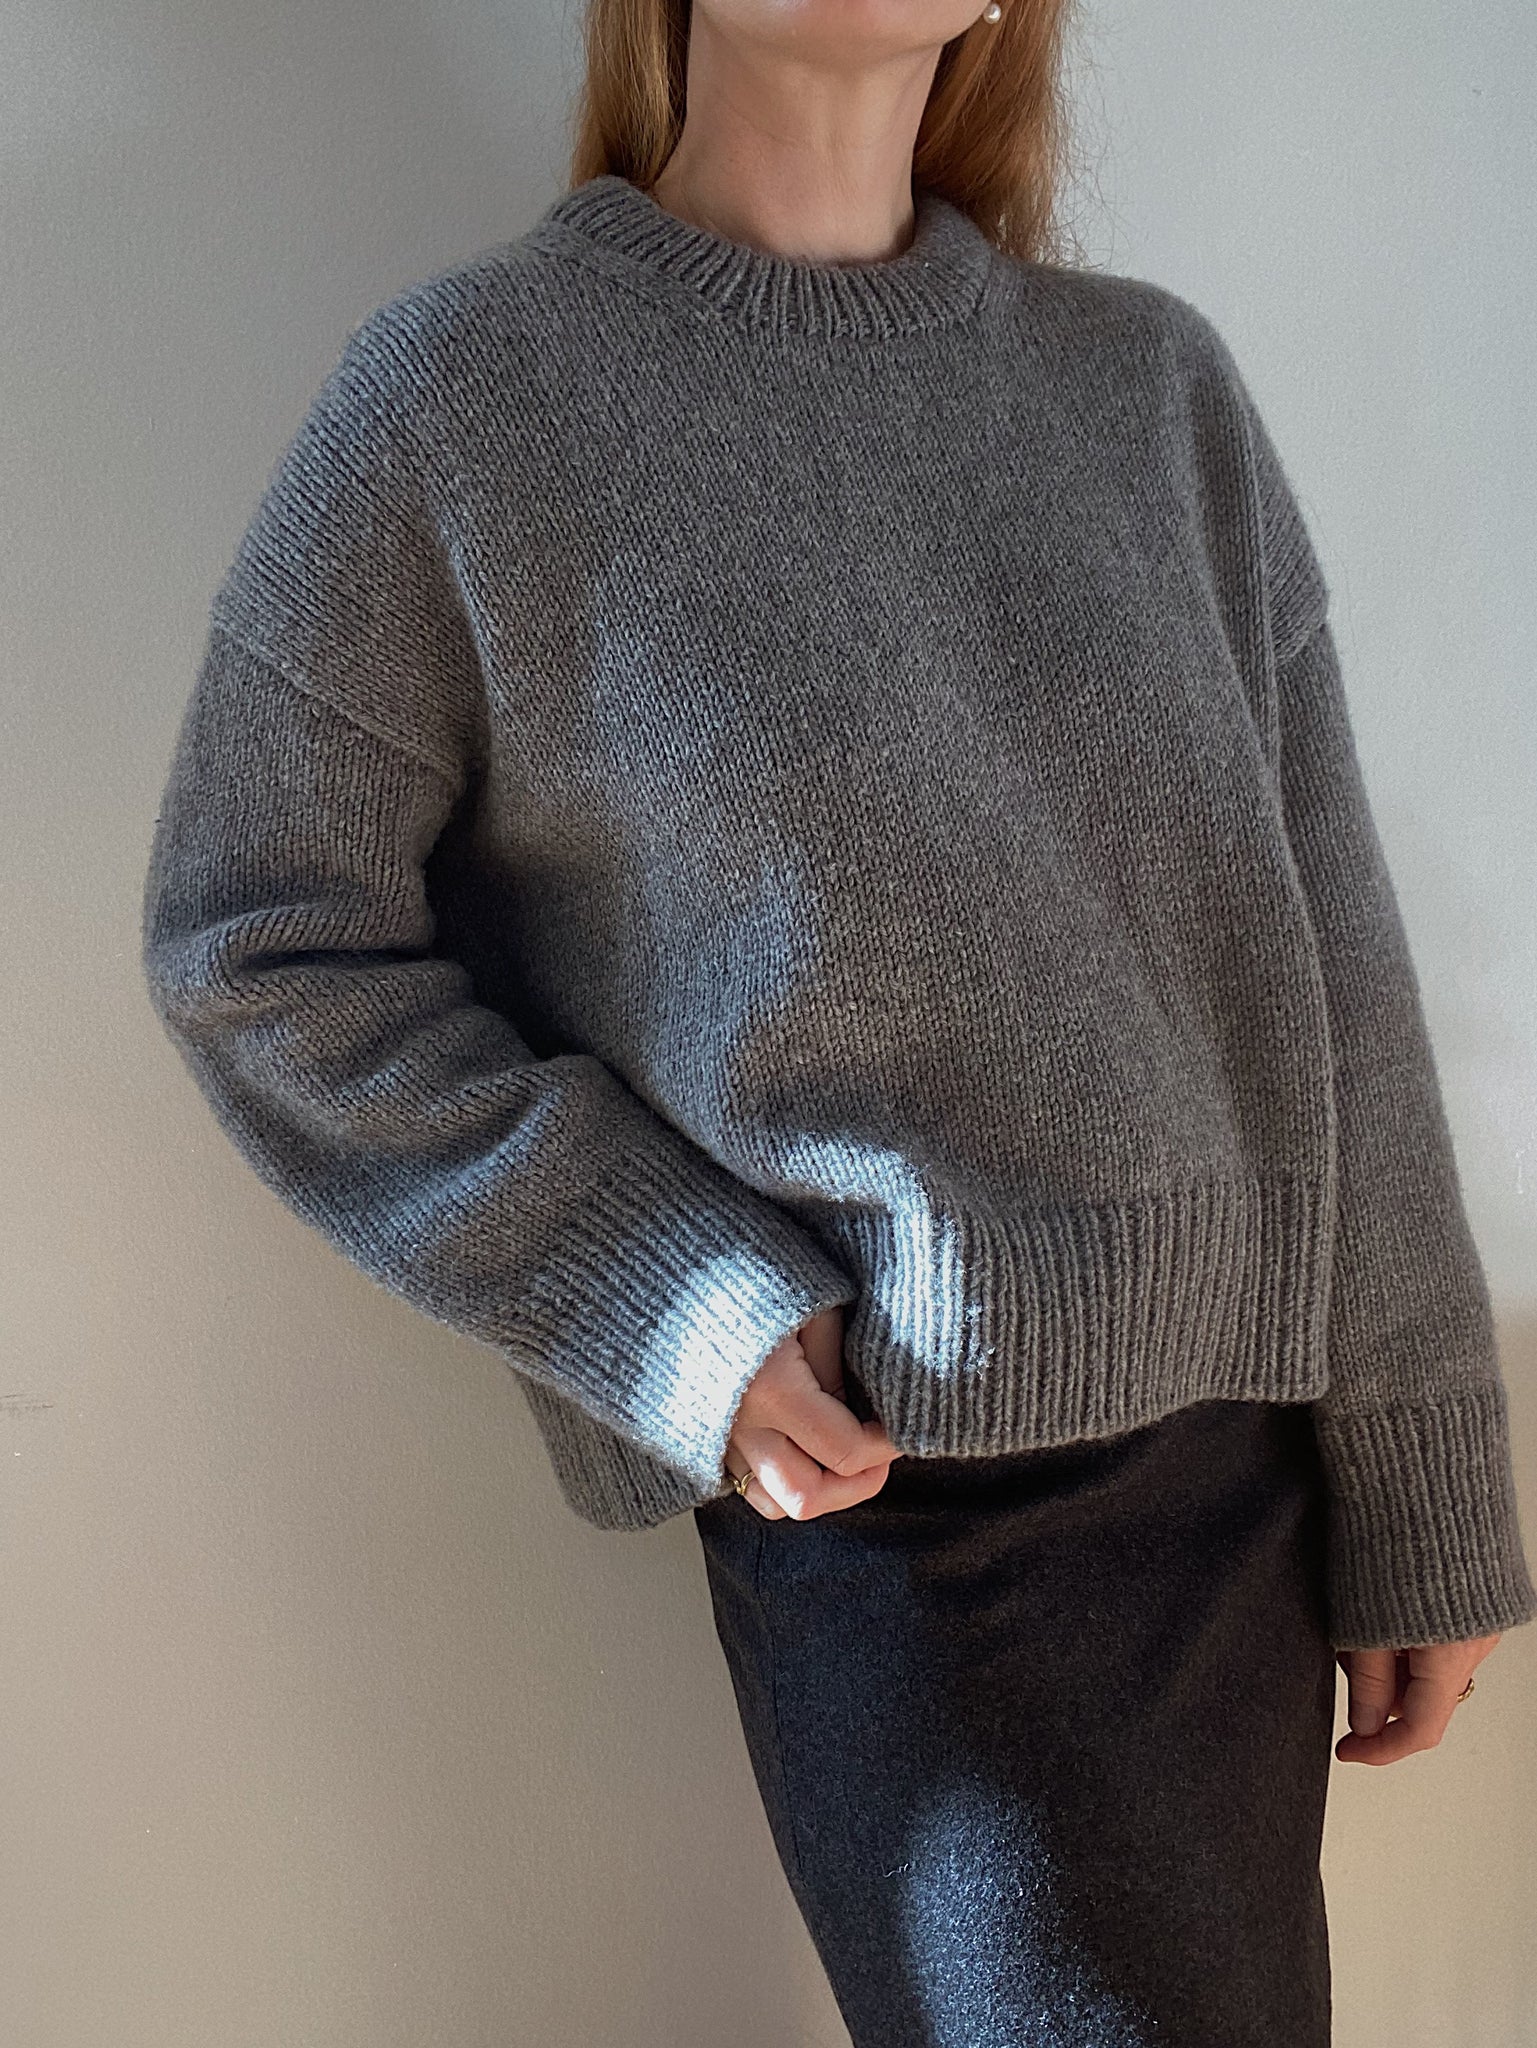 Sweater No. 23 - Knitting Pattern in English – • MY FAVOURITE THINGS ...